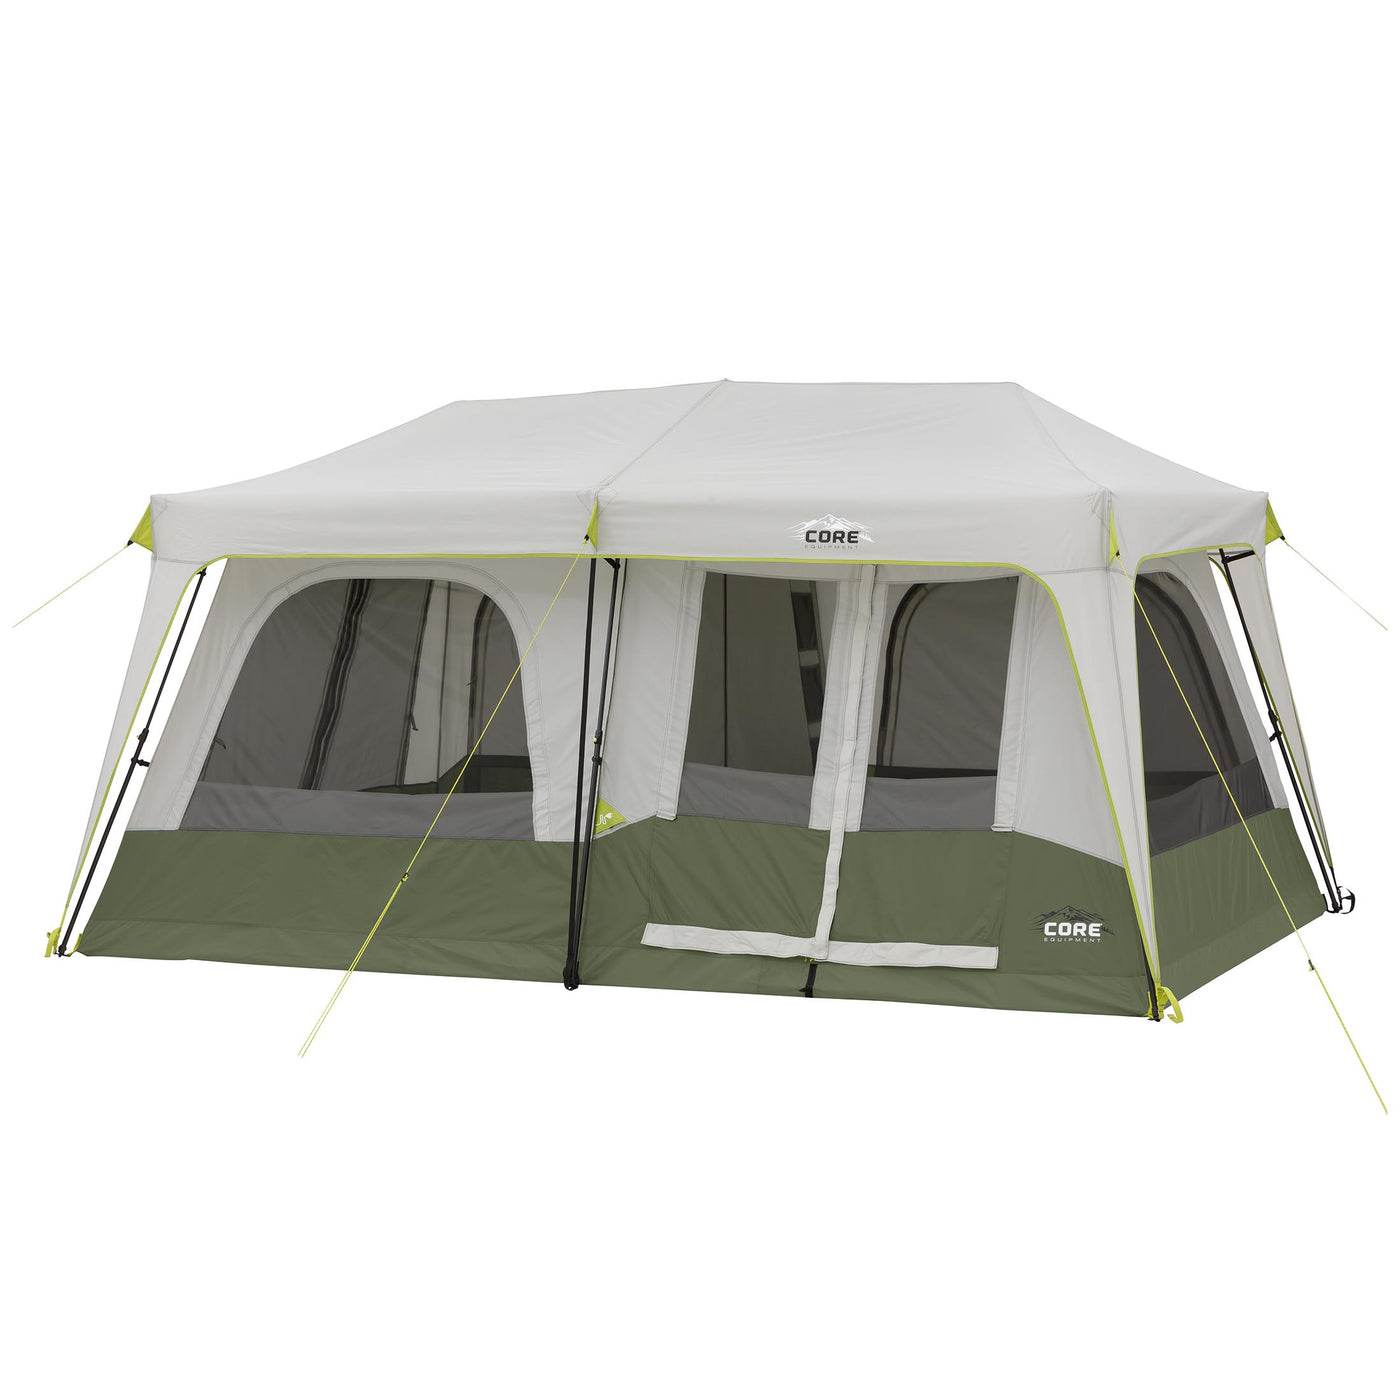 Campvalley 14-Person Instant Cabin Tent - Sam's Club